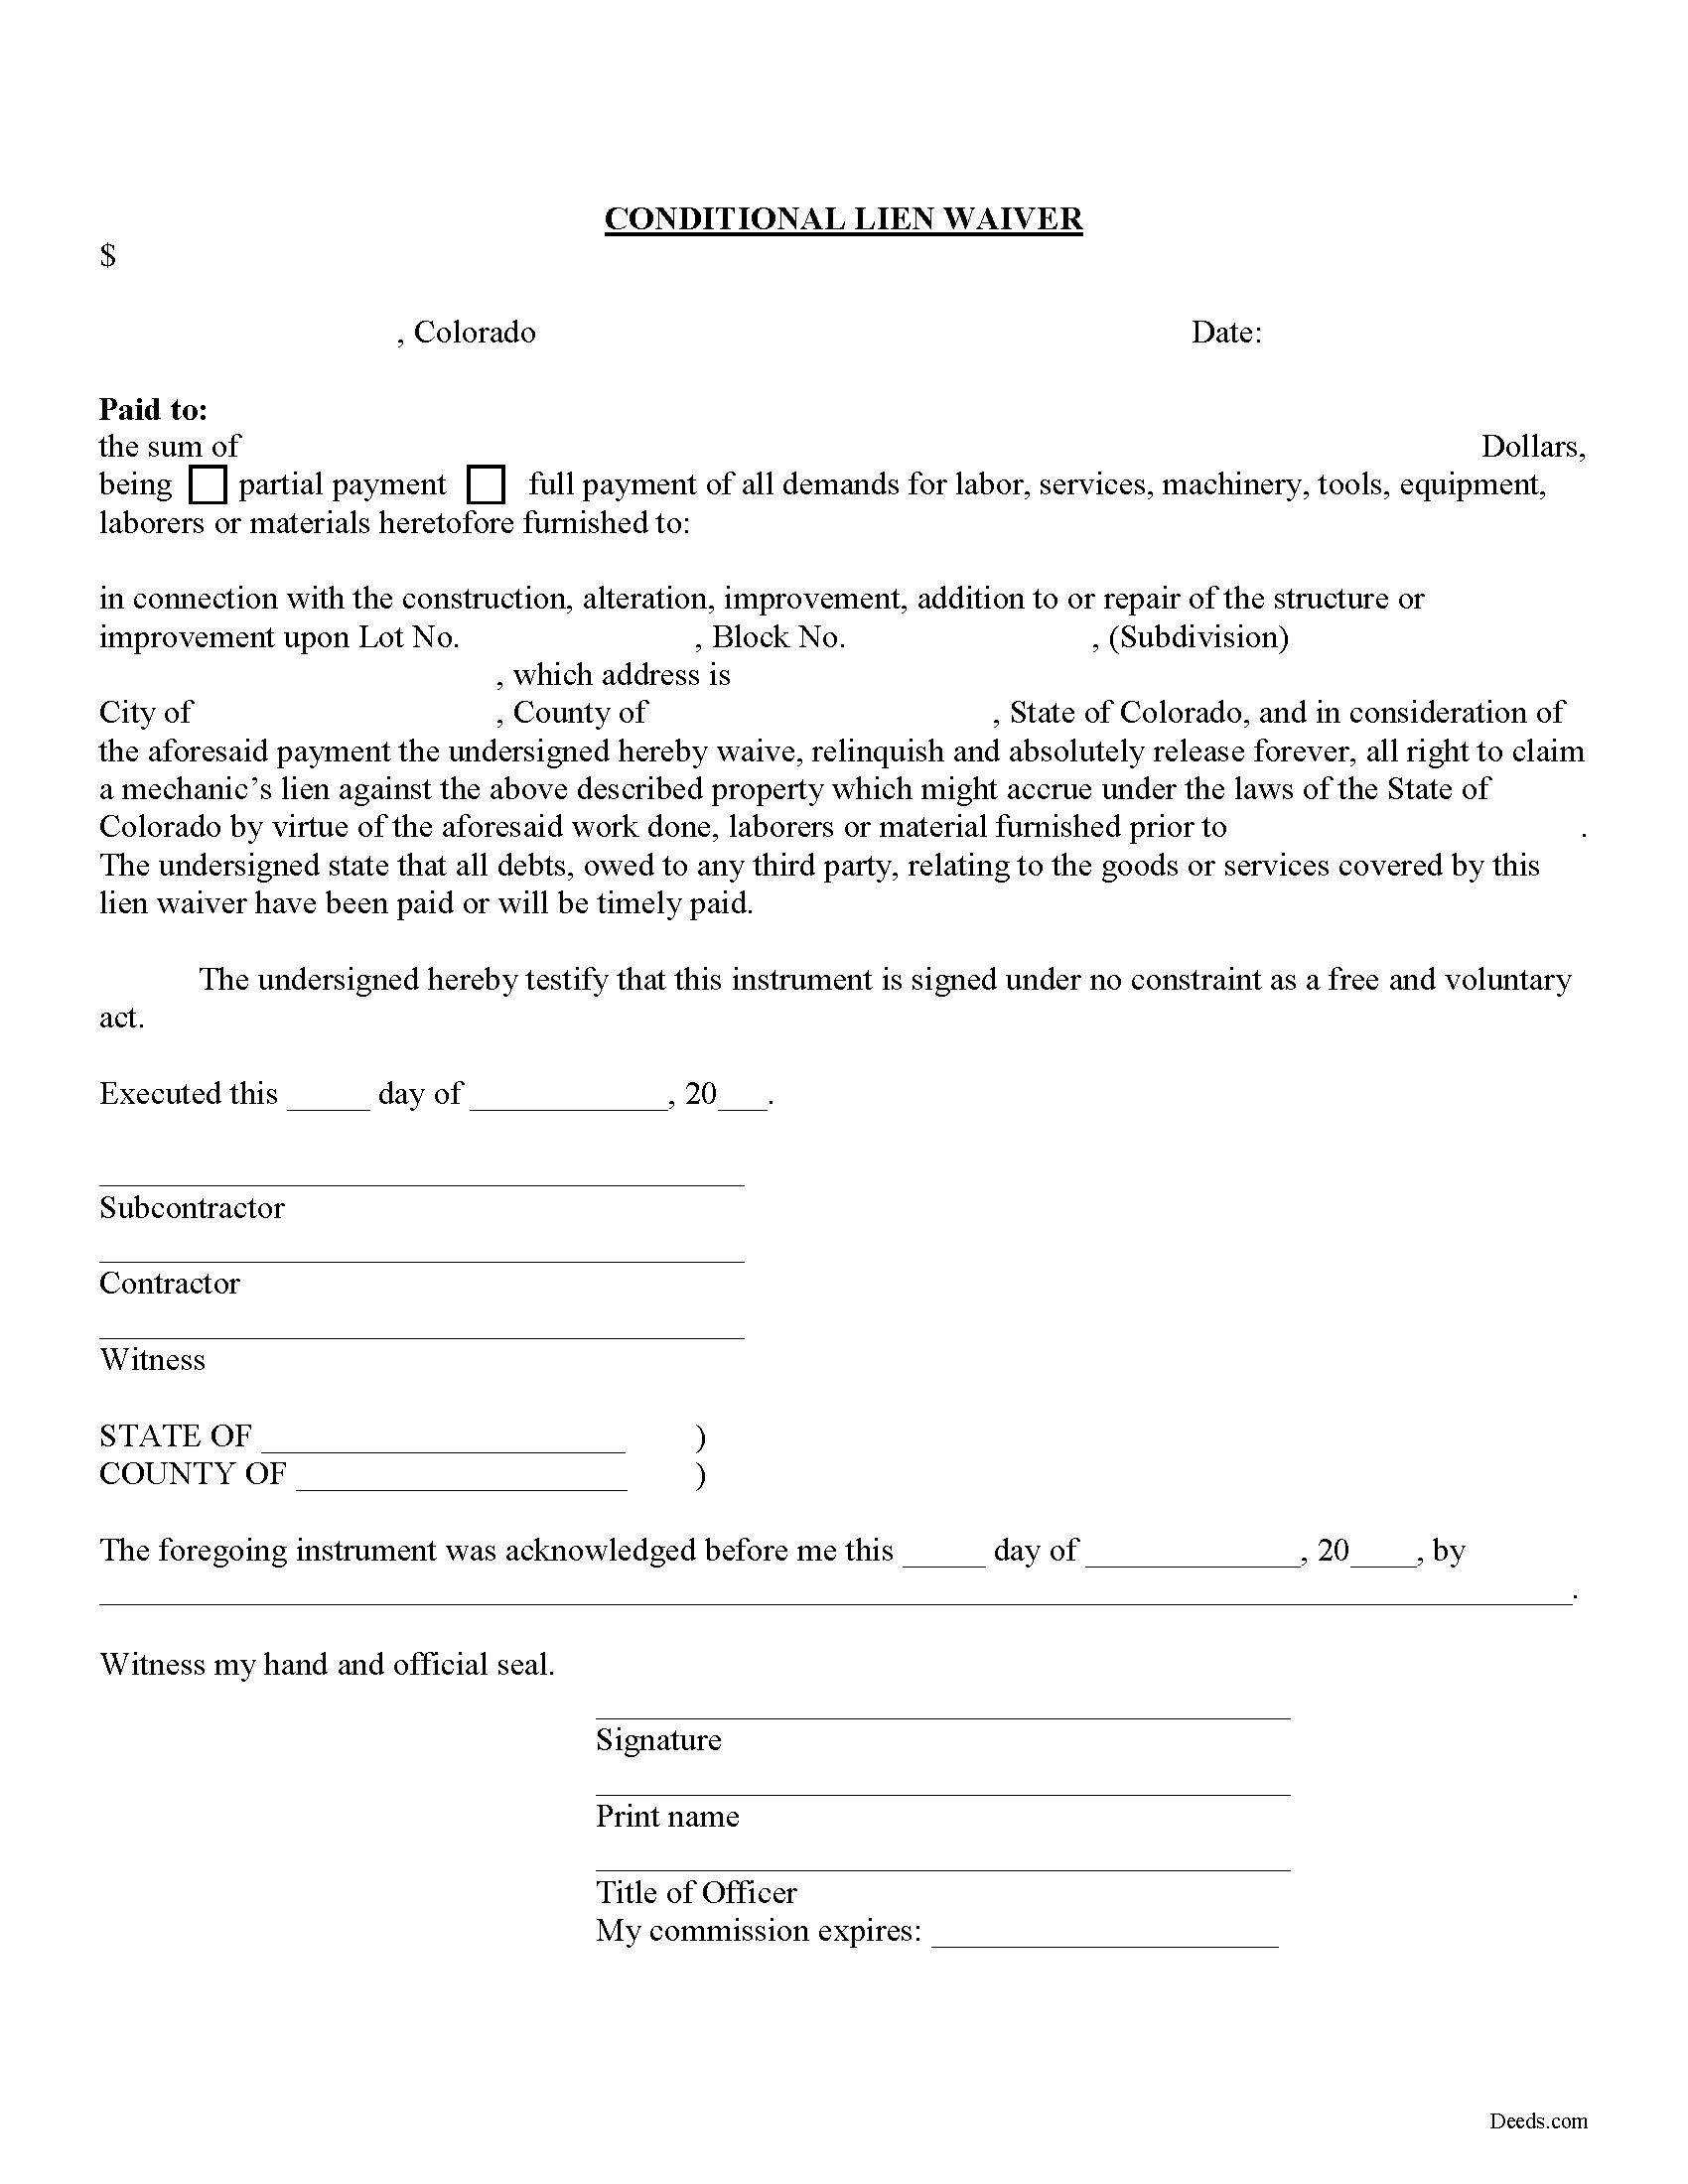 Conditional Lien Waiver Form